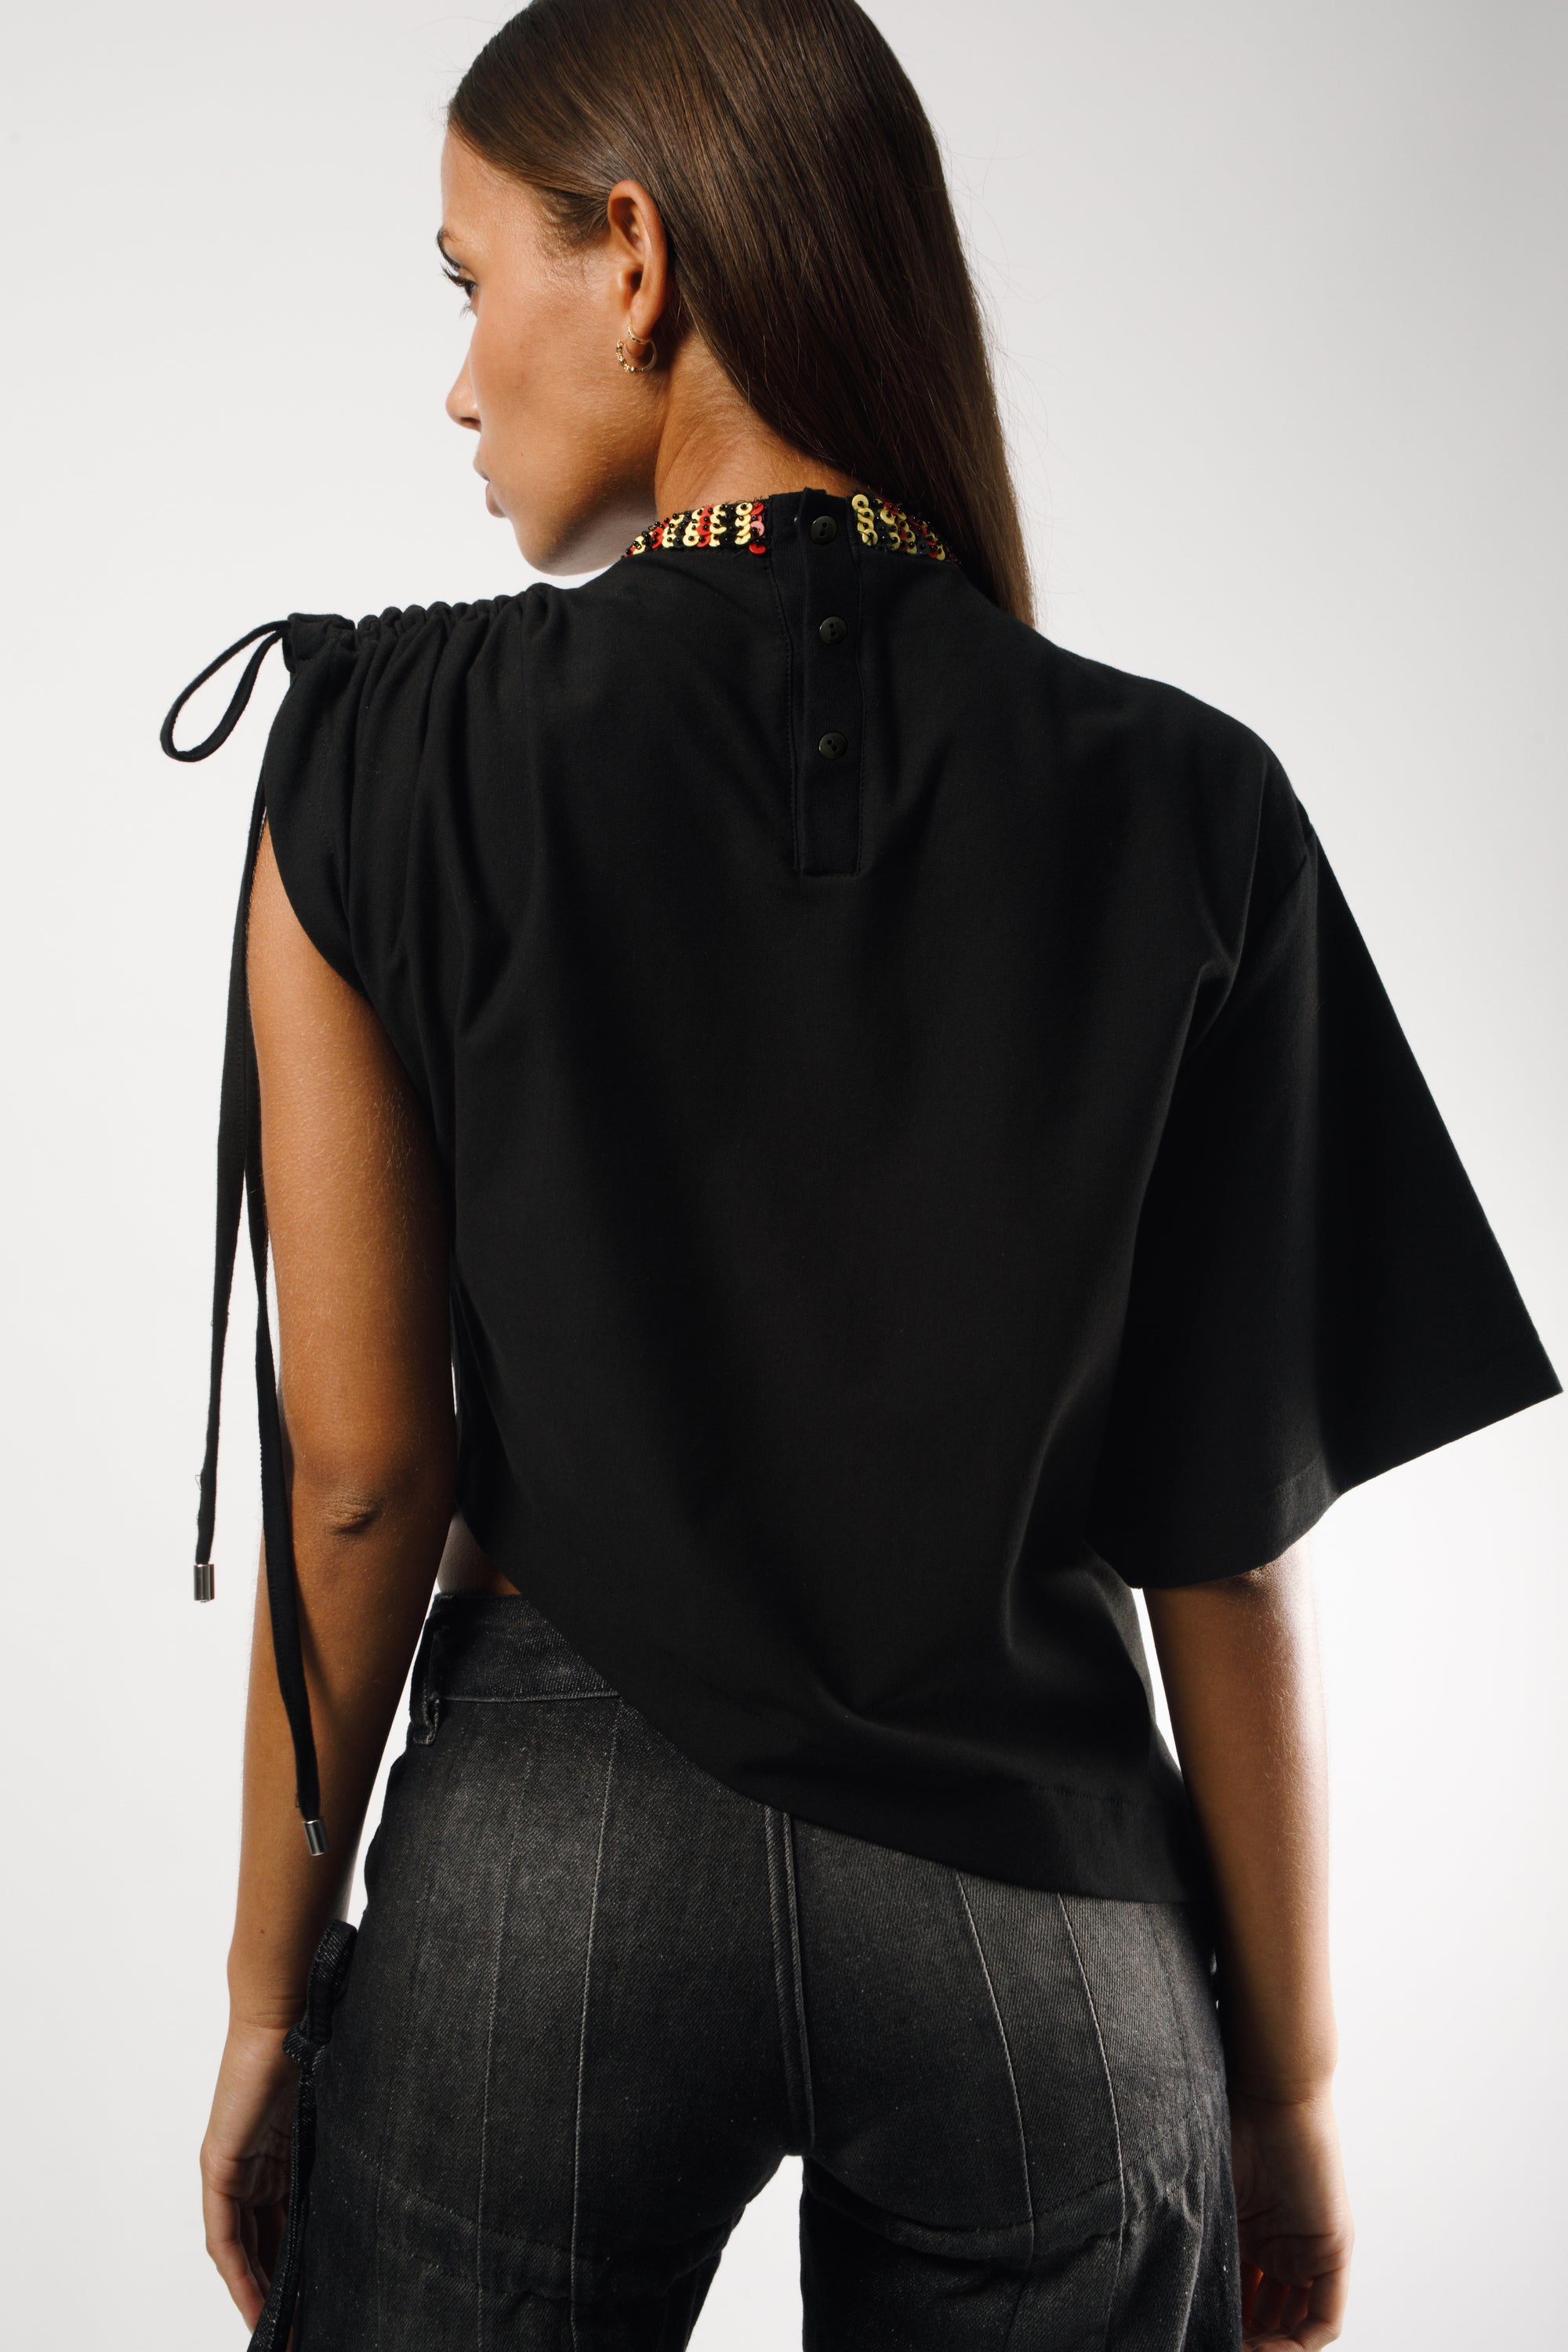 Deconstructed T-shirt with one oversized sleeve and one short sleeve, featuring adjustable cords. The collar is embroidered with rocaille pearls, handcrafted in Dakar, and black buttons on the back - back 